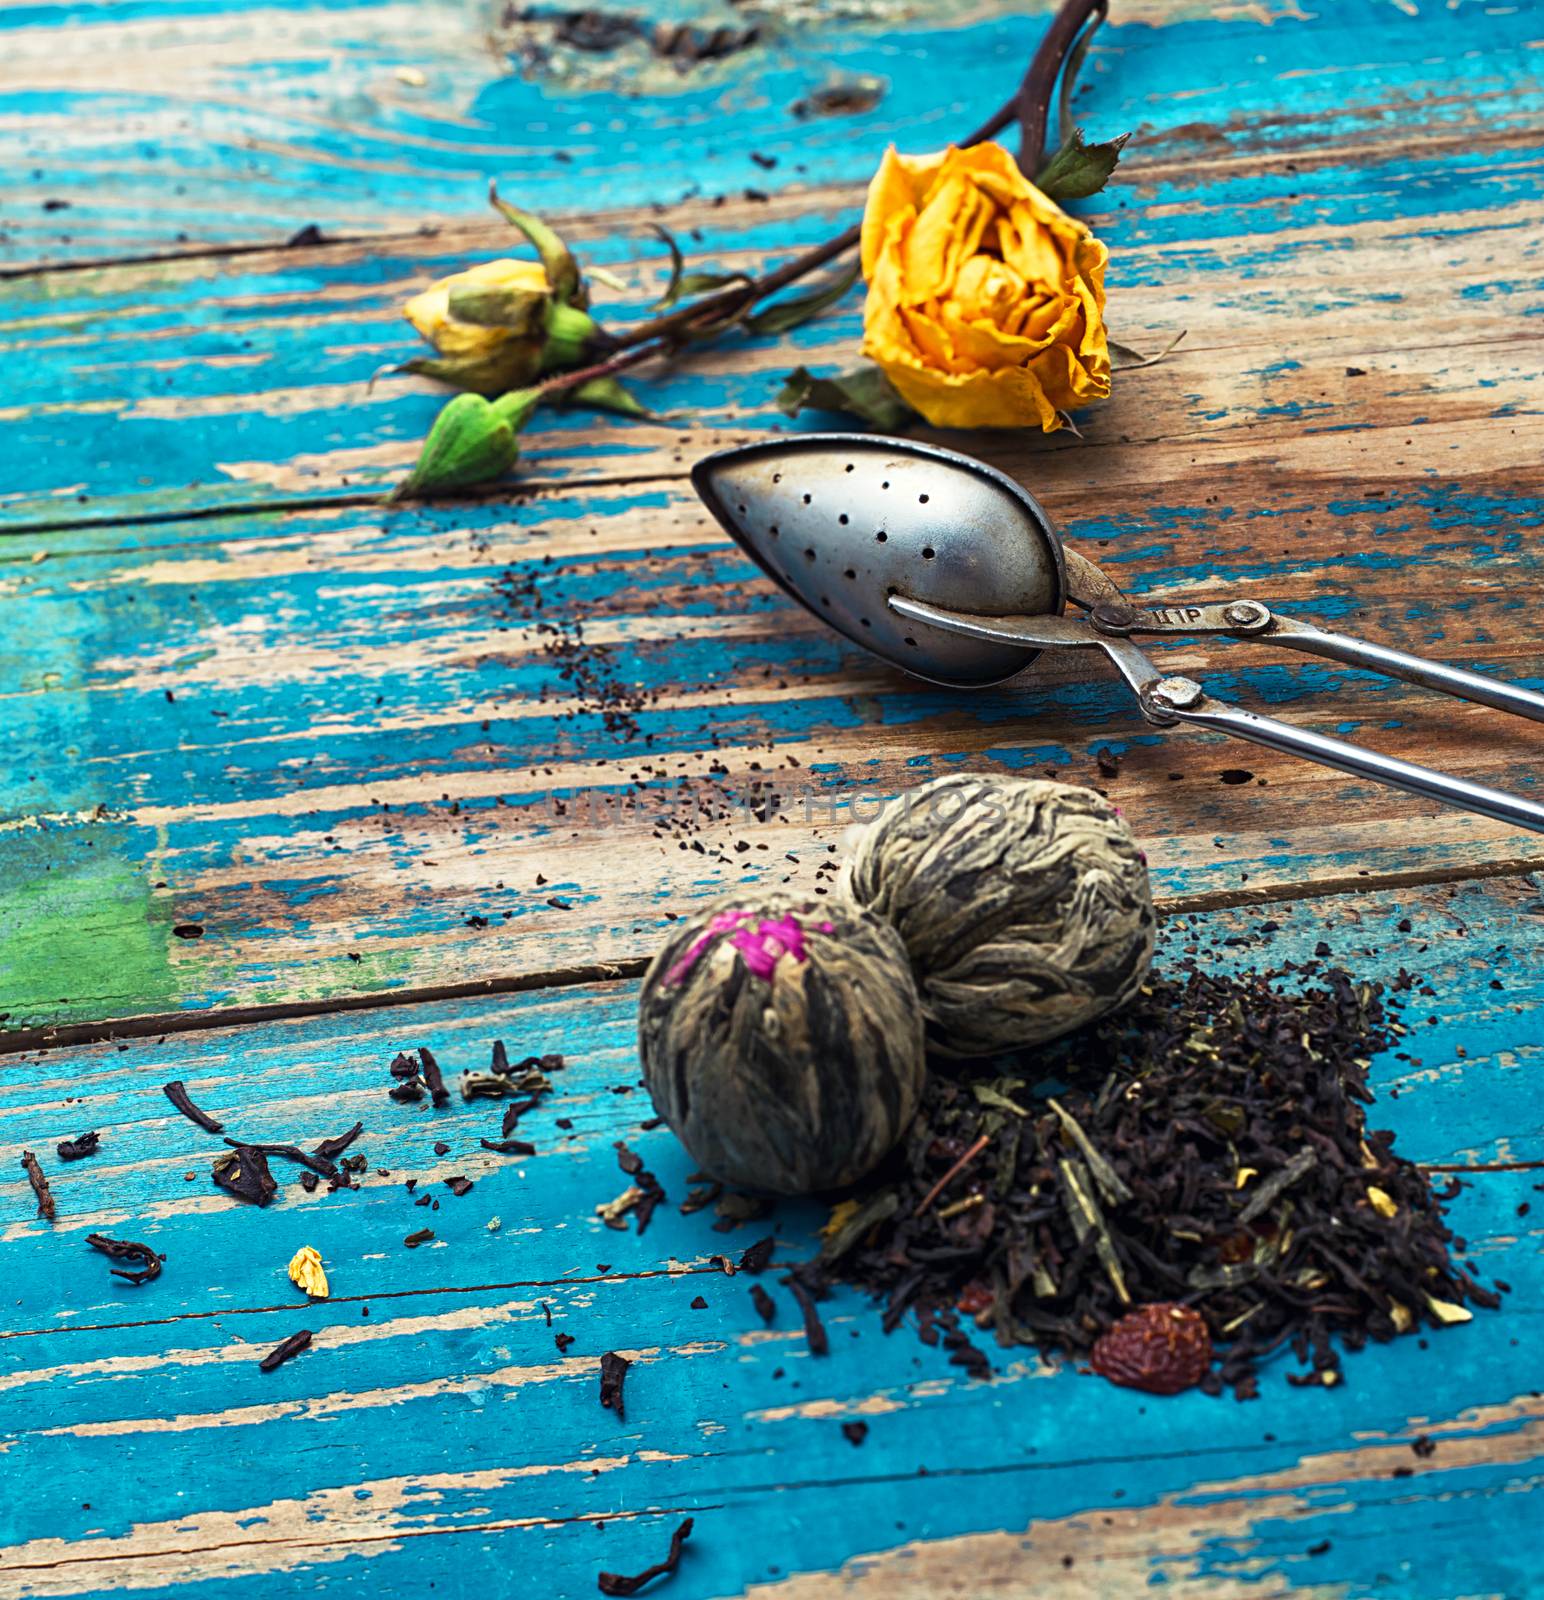 Tea leaves for brewing,tea spoon and dried yellow rose.The image is tinted in vintage style